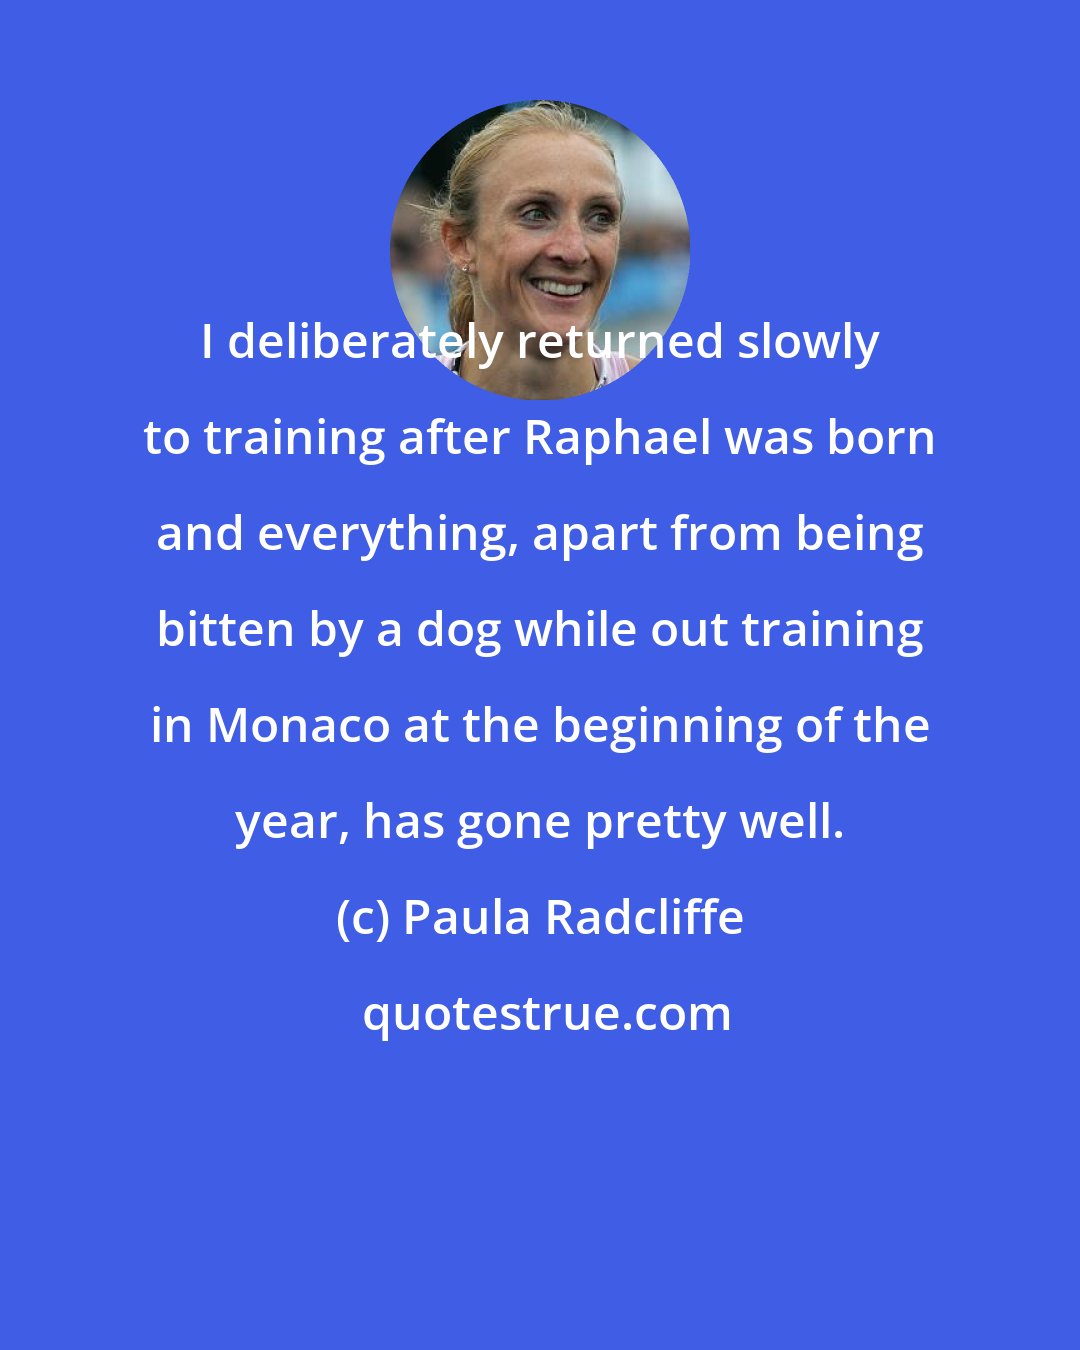 Paula Radcliffe: I deliberately returned slowly to training after Raphael was born and everything, apart from being bitten by a dog while out training in Monaco at the beginning of the year, has gone pretty well.